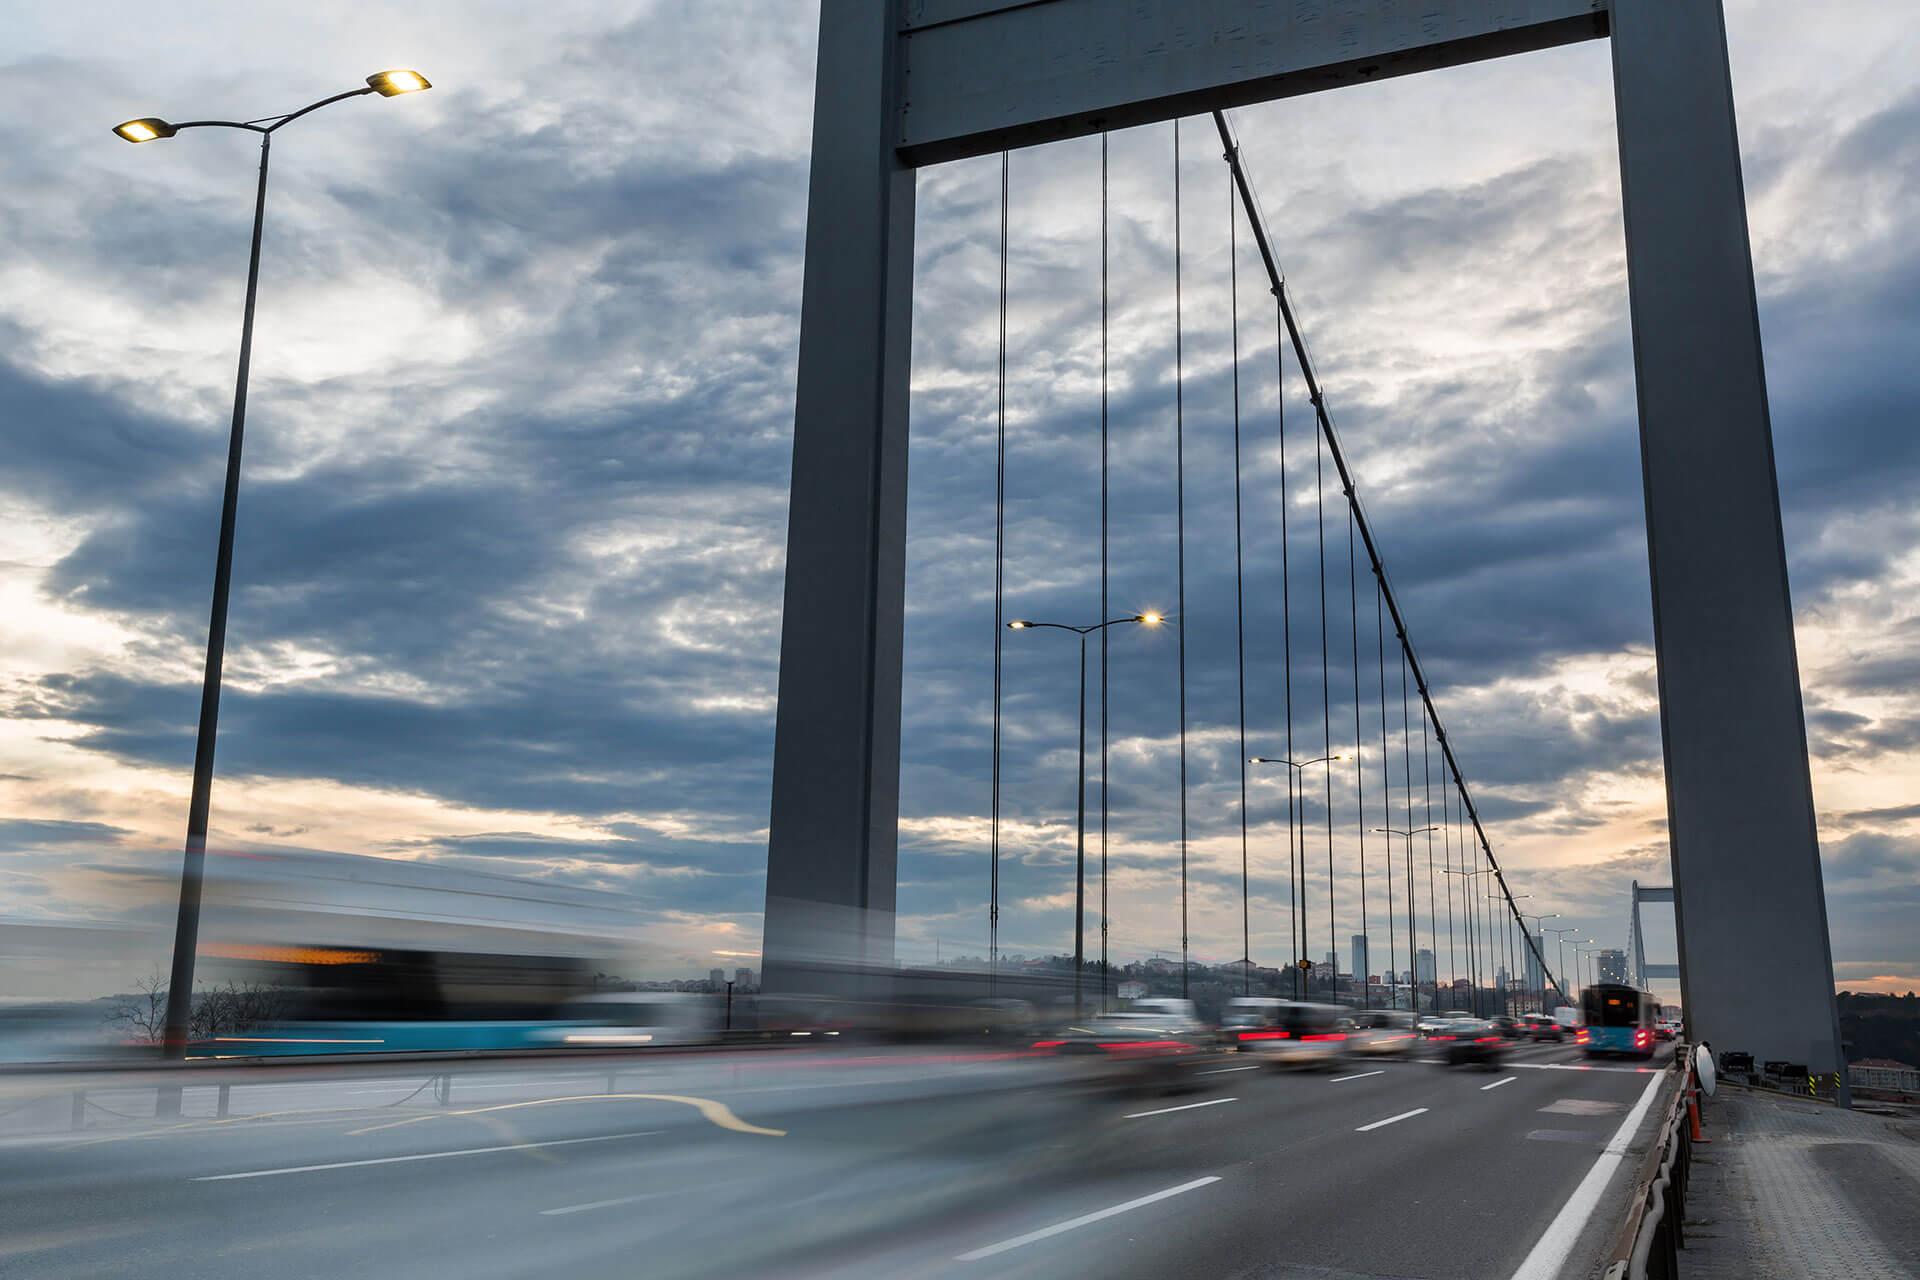 Energy efficient Teceo luminaires provide a high light output, improving visibility on Fatih Sultan Mehmet Bridge